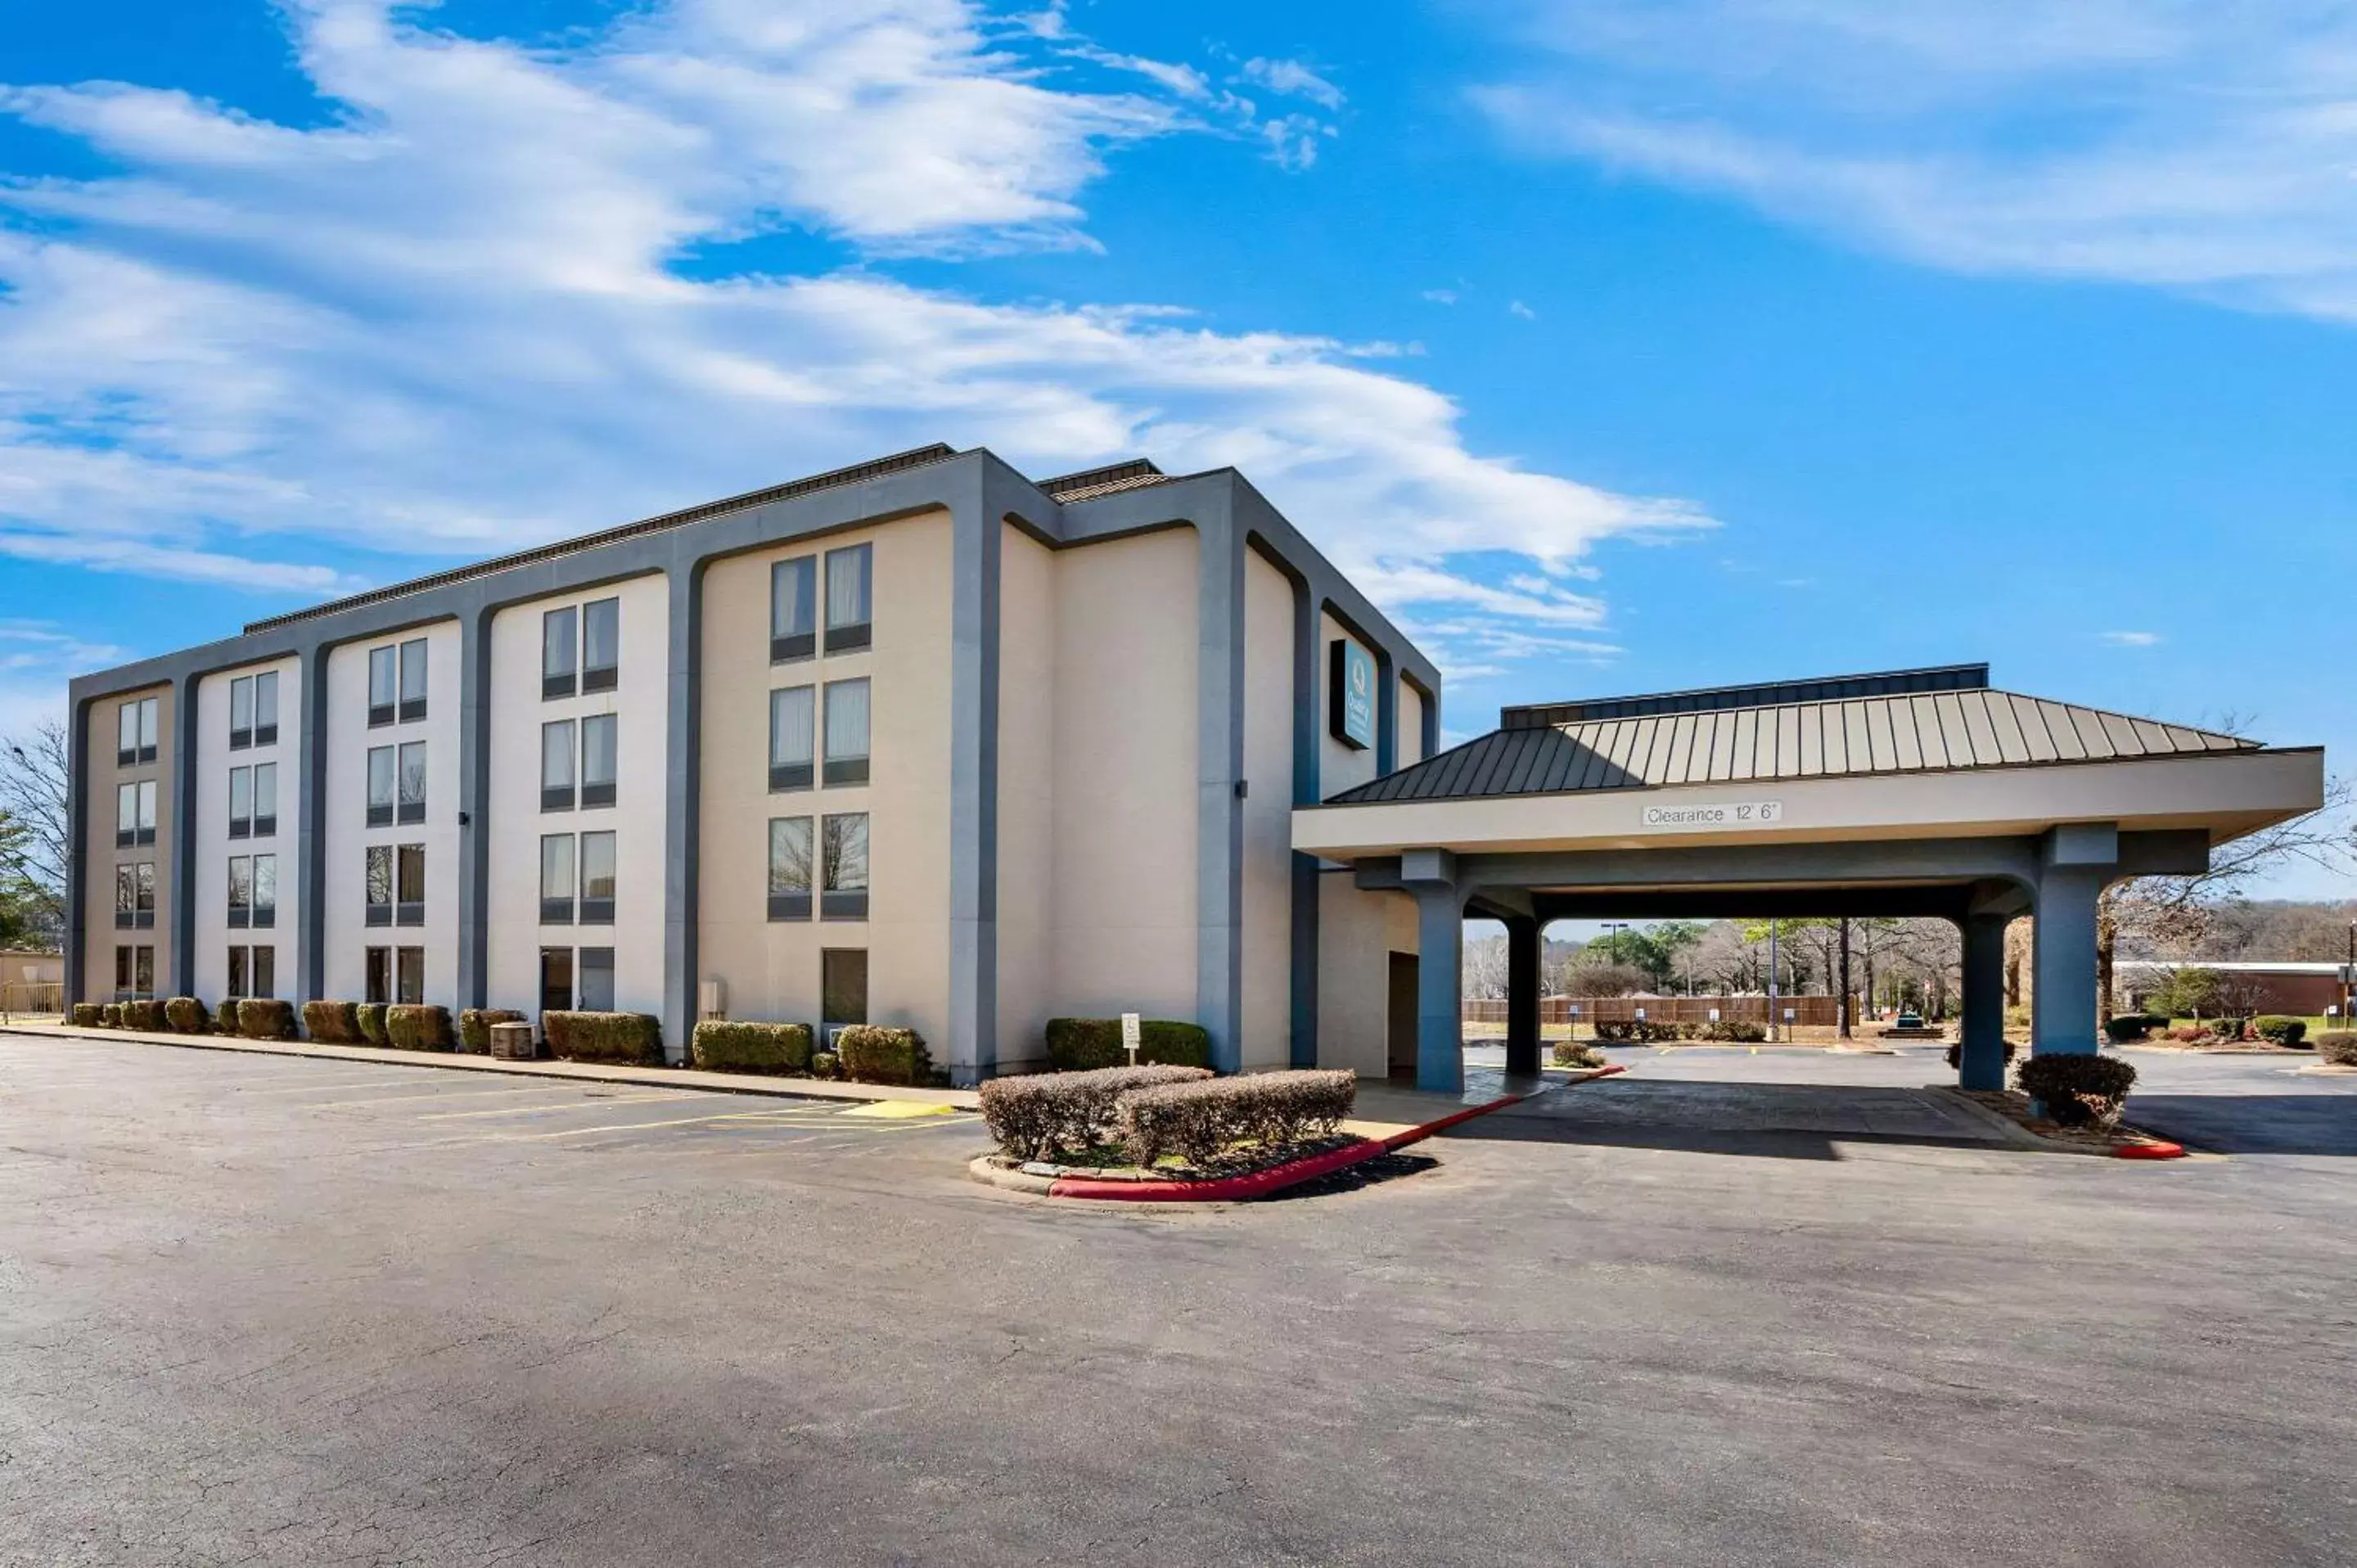 Property Building in Quality Inn & Suites North Little Rock